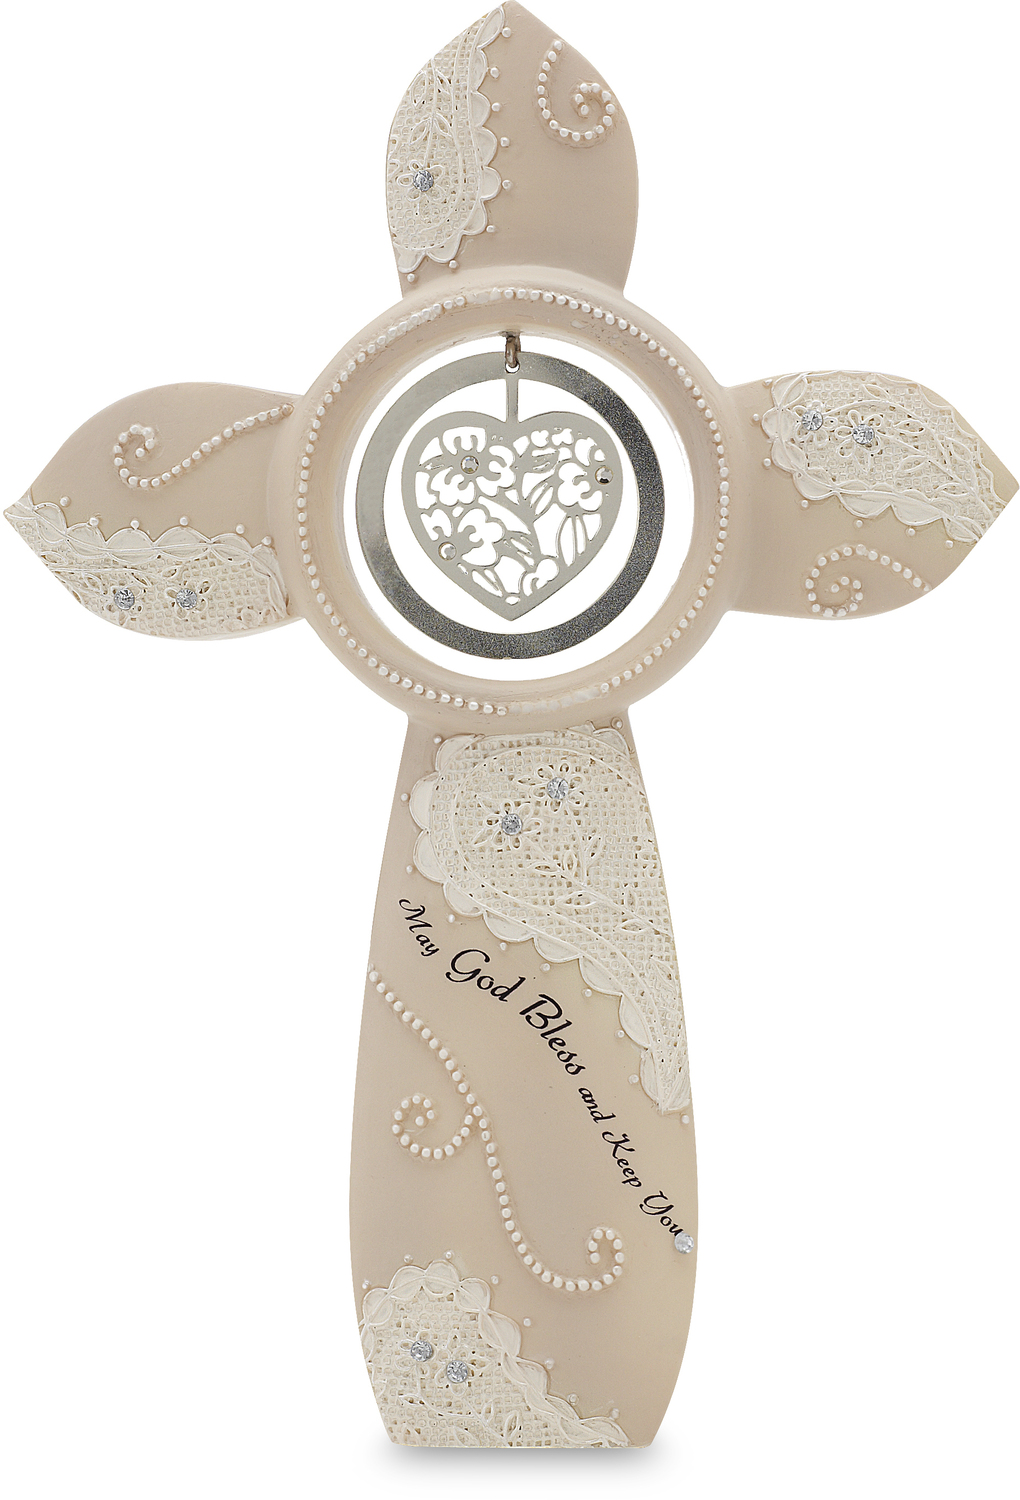 May God Bless and Keep You by Little Things Mean A Lot - May God Bless and Keep You - 7" Self Standing Cross